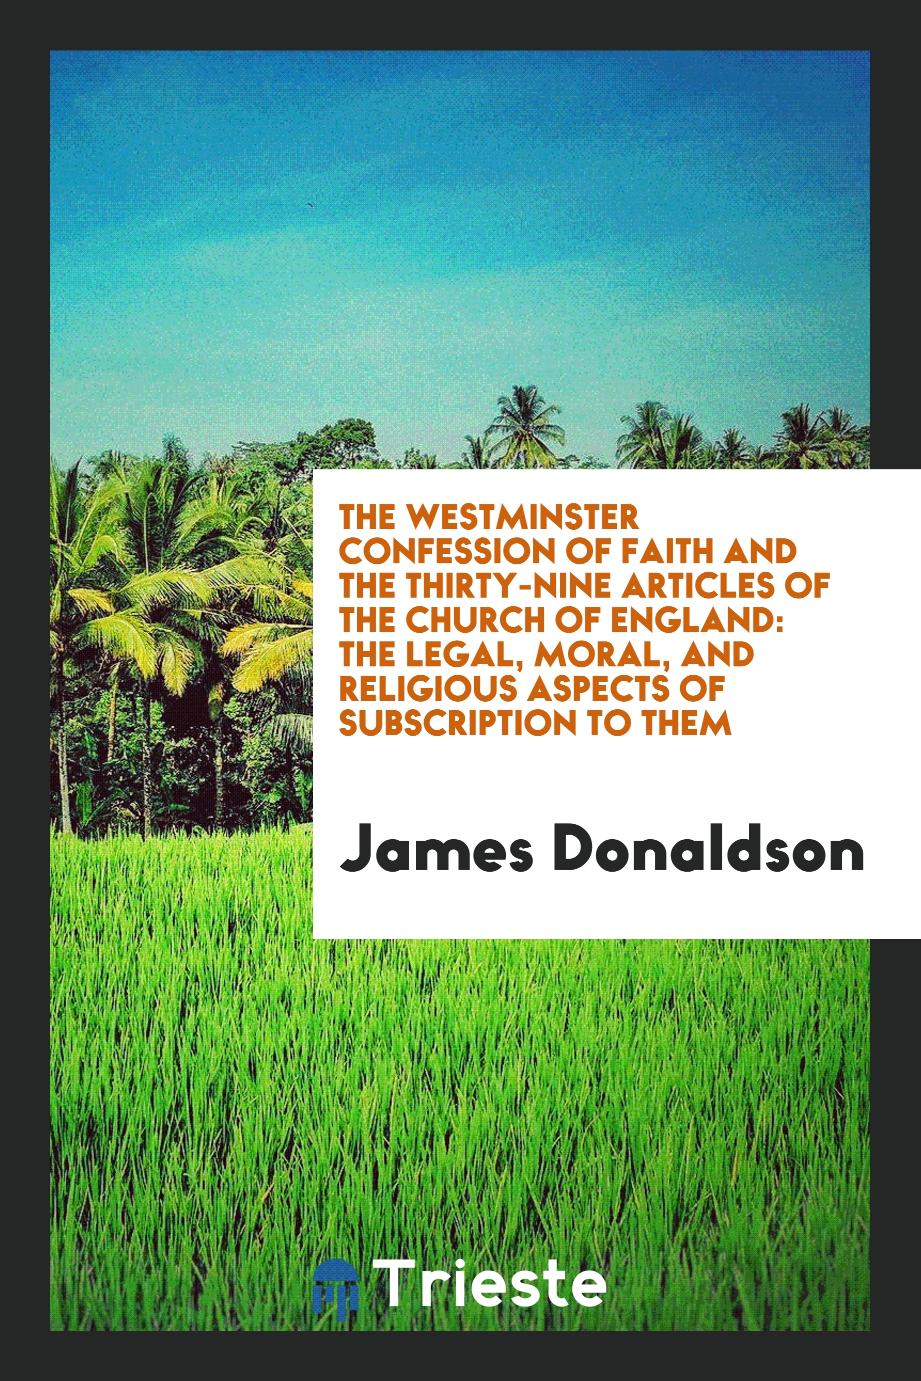 The Westminster Confession of Faith and the Thirty-Nine Articles of the Church of England: The Legal, Moral, and Religious Aspects of Subscription to Them